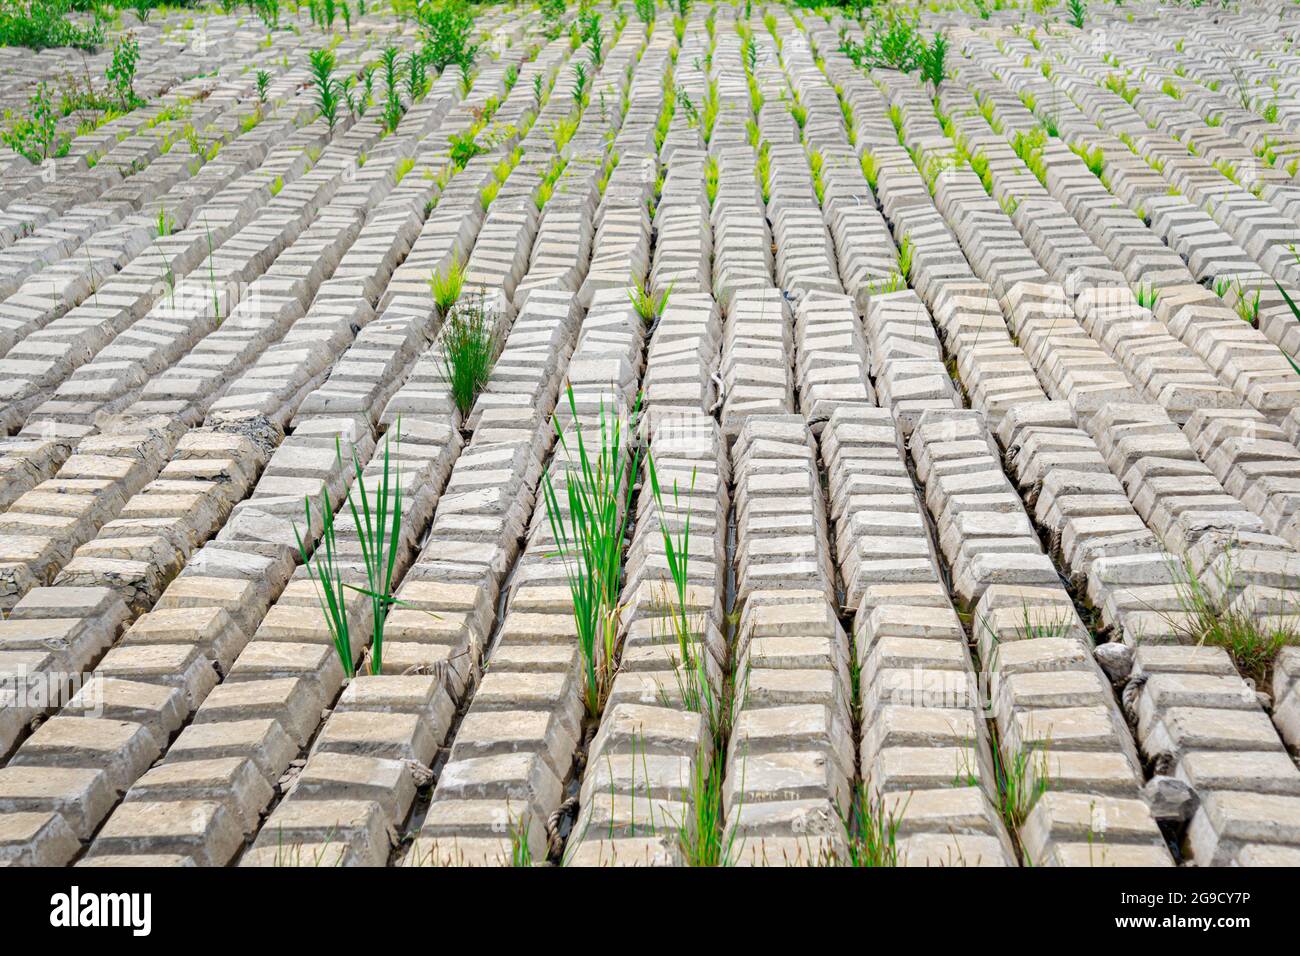 terrain covered with flexible concrete mat to prevent erosion, laid on the ground, with ferns growing through it Stock Photo